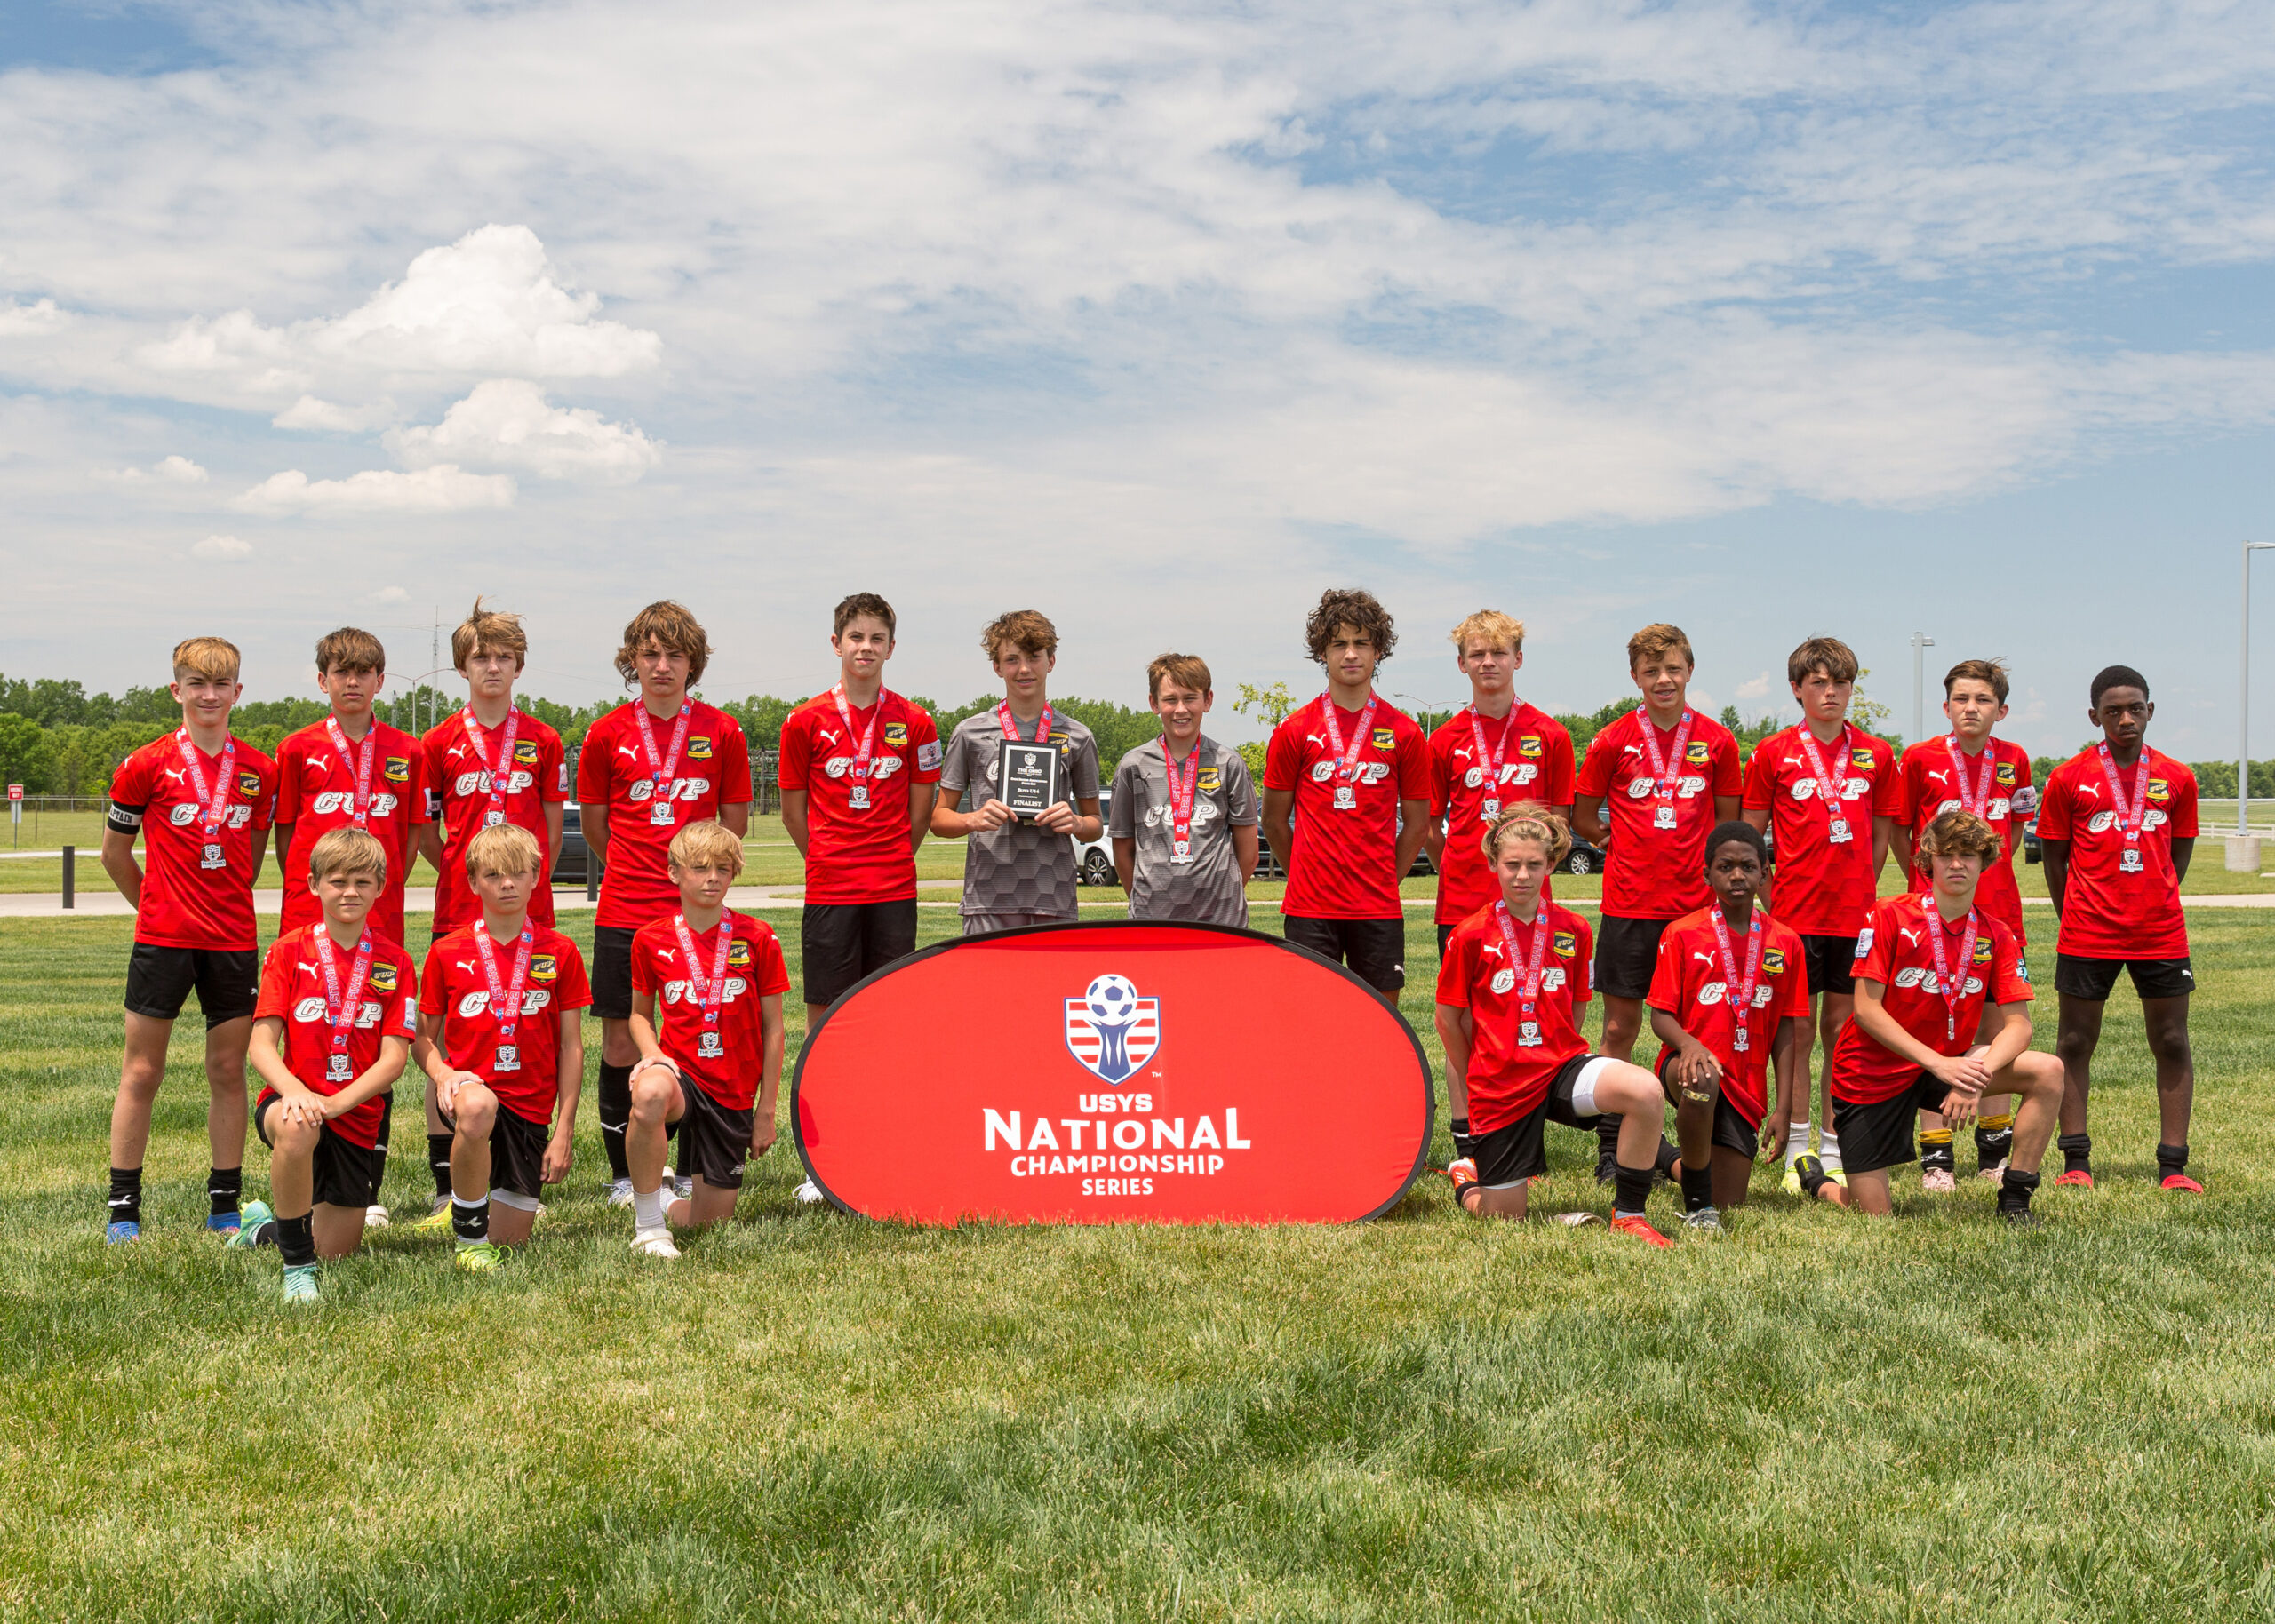 Champions crowned at US Club Soccer Ohio State Cup - SoccerWire